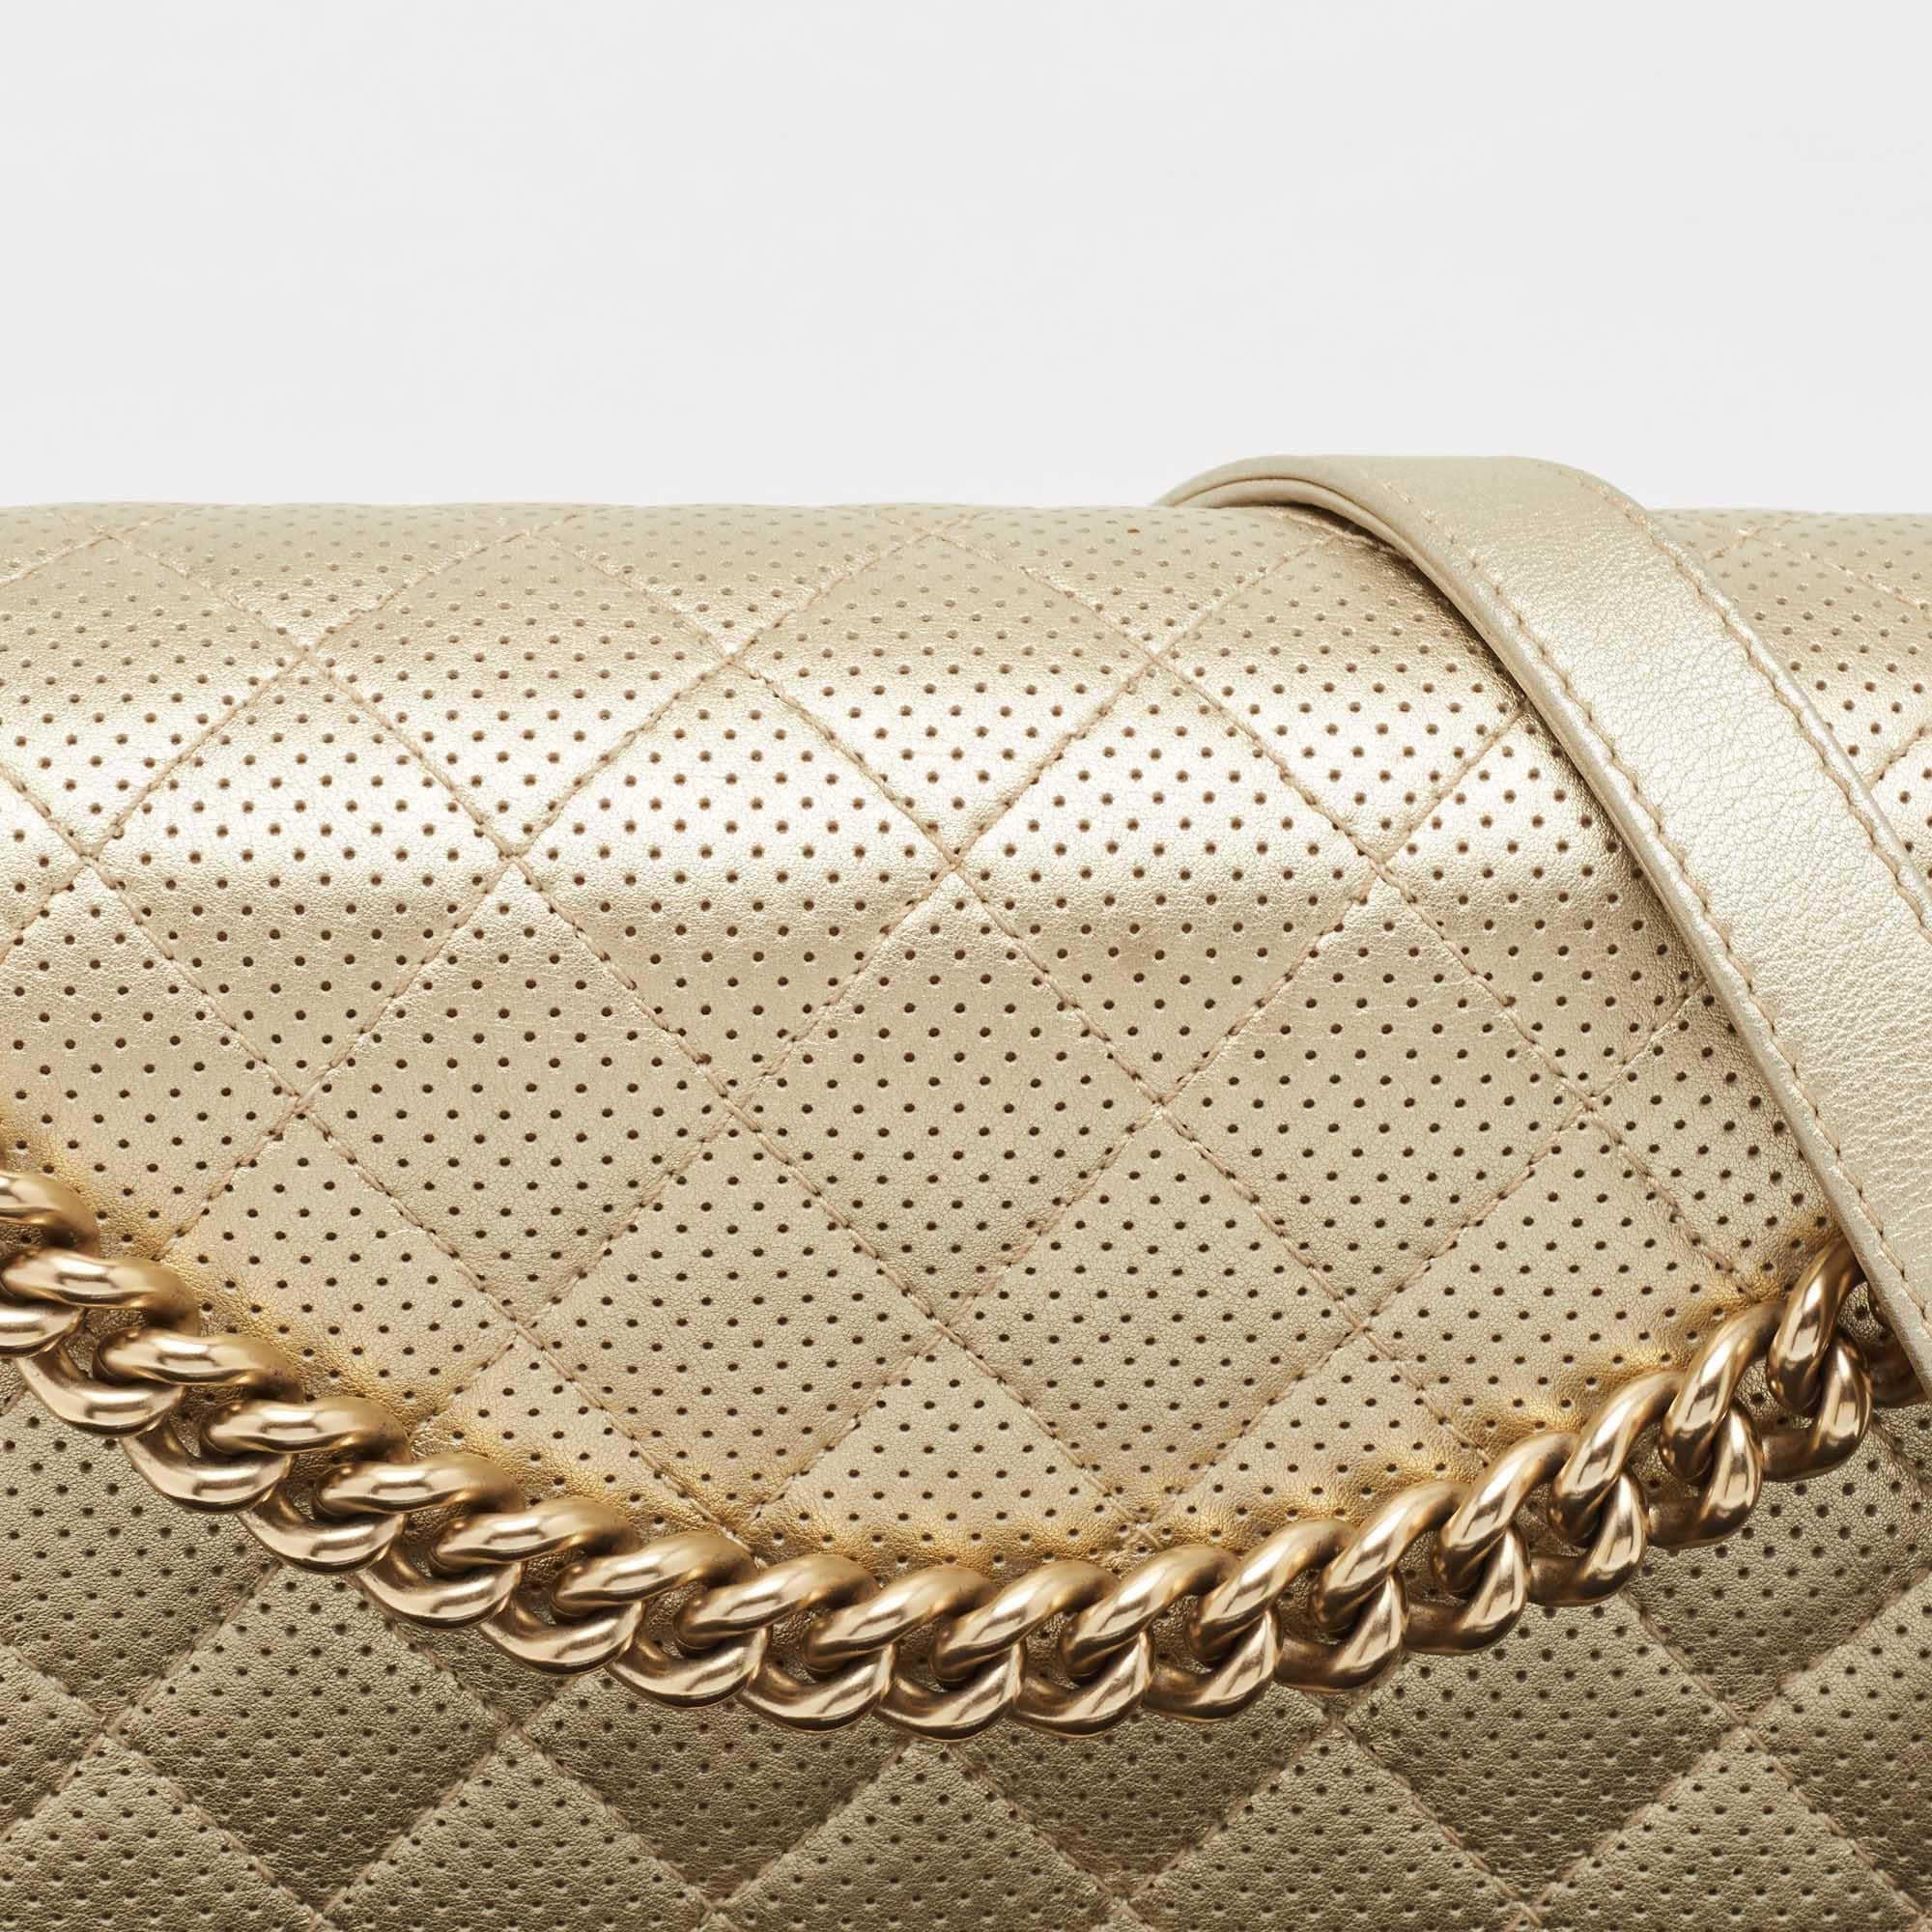 Chanel Light Gold Perforated Leather New Medium Boy Flap Bag 6